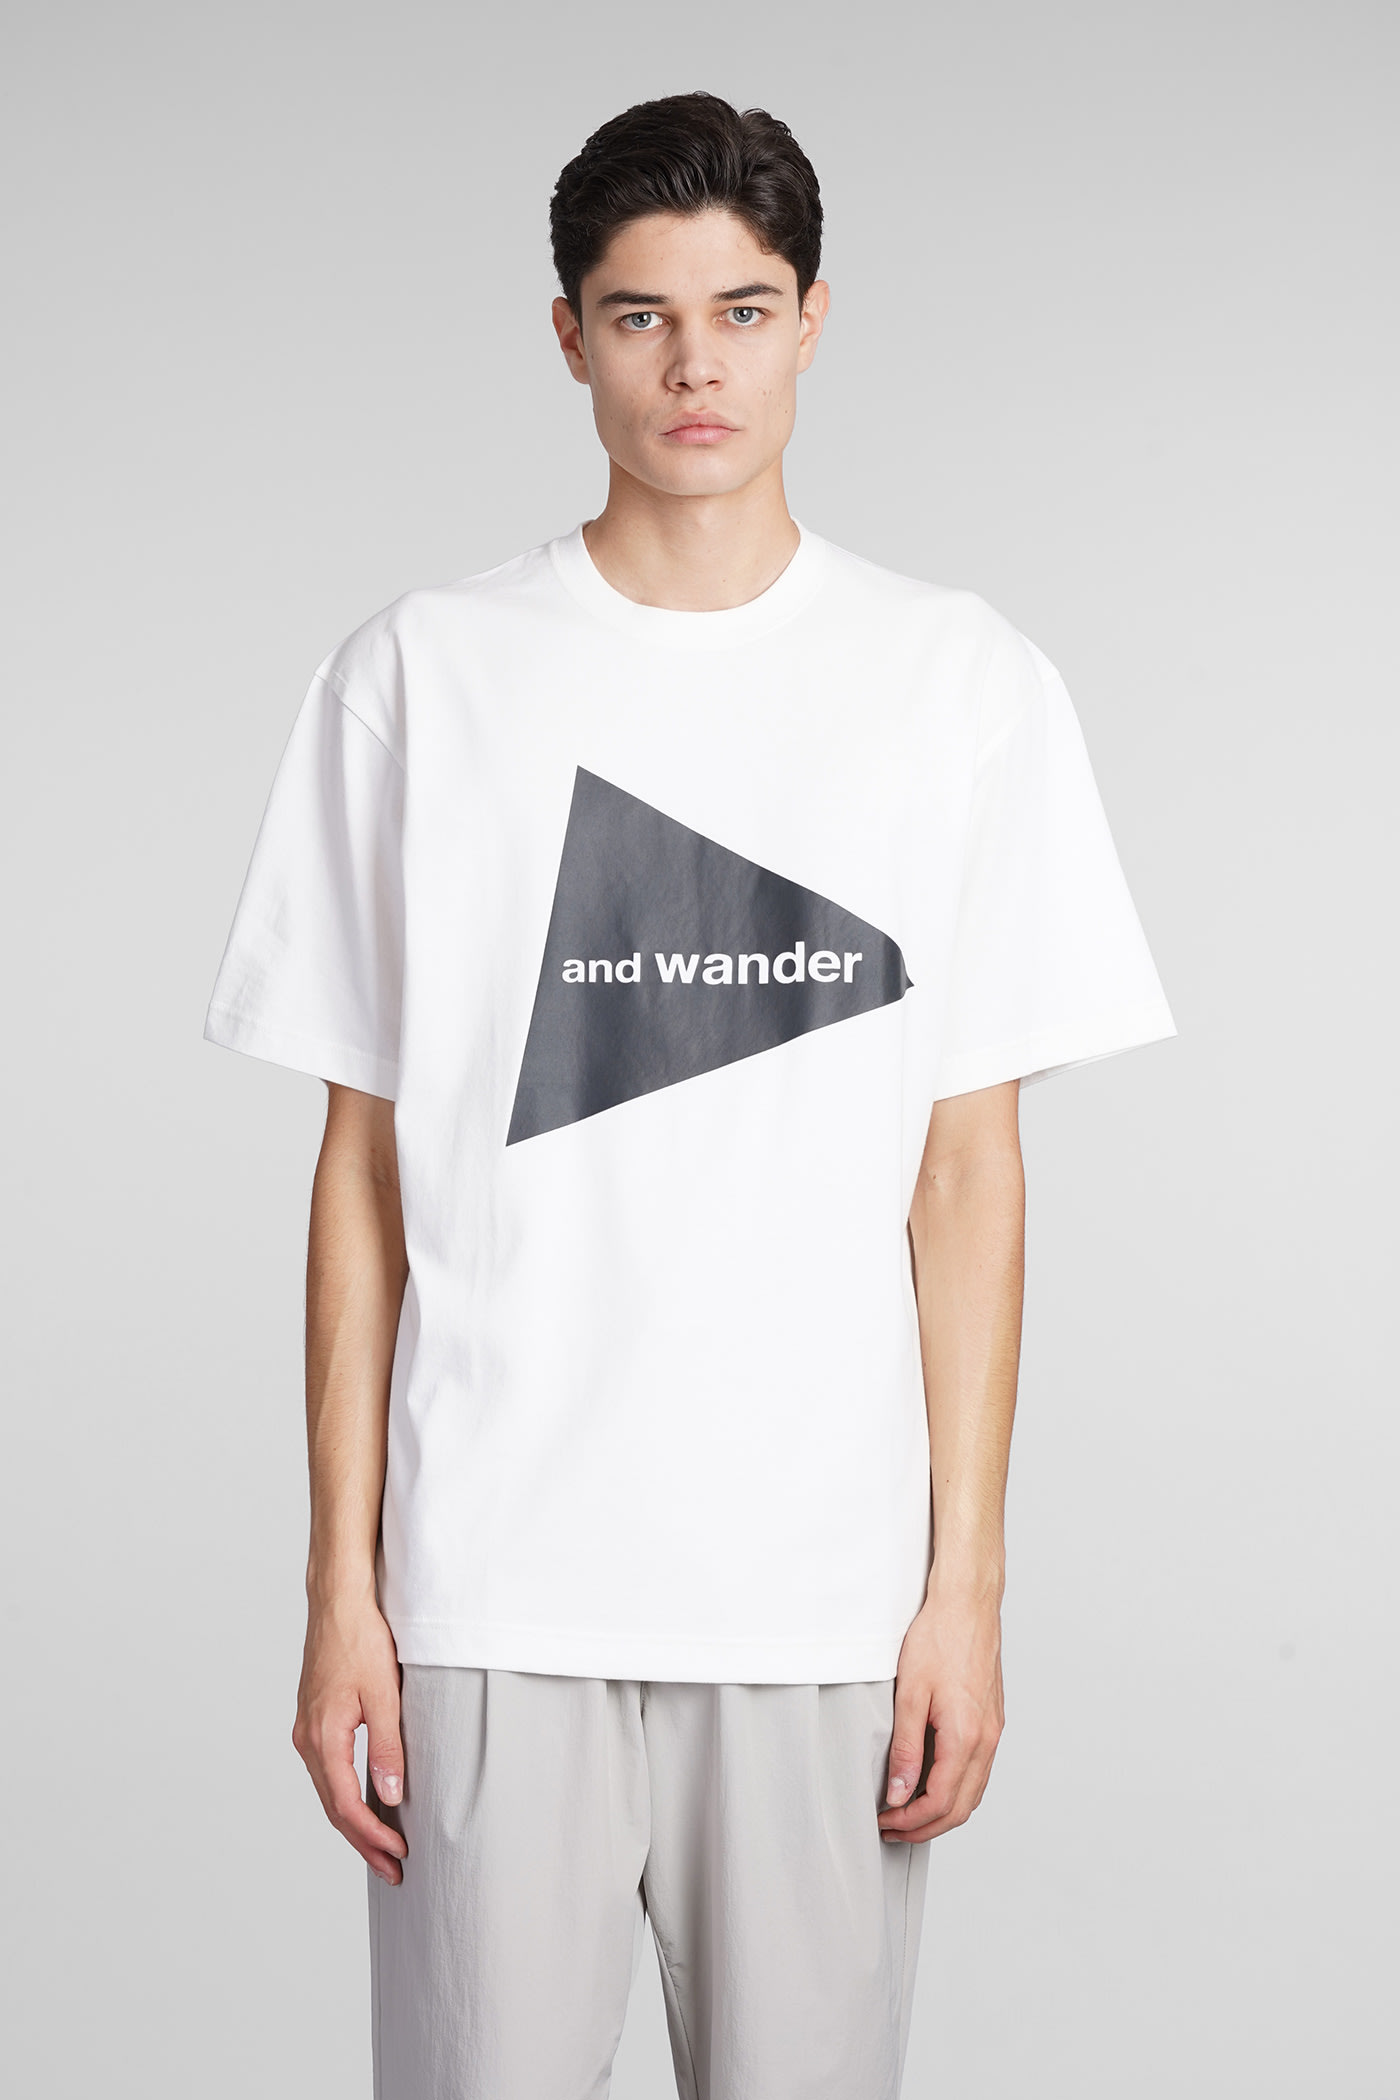 AND WANDER T-SHIRT IN WHITE COTTON